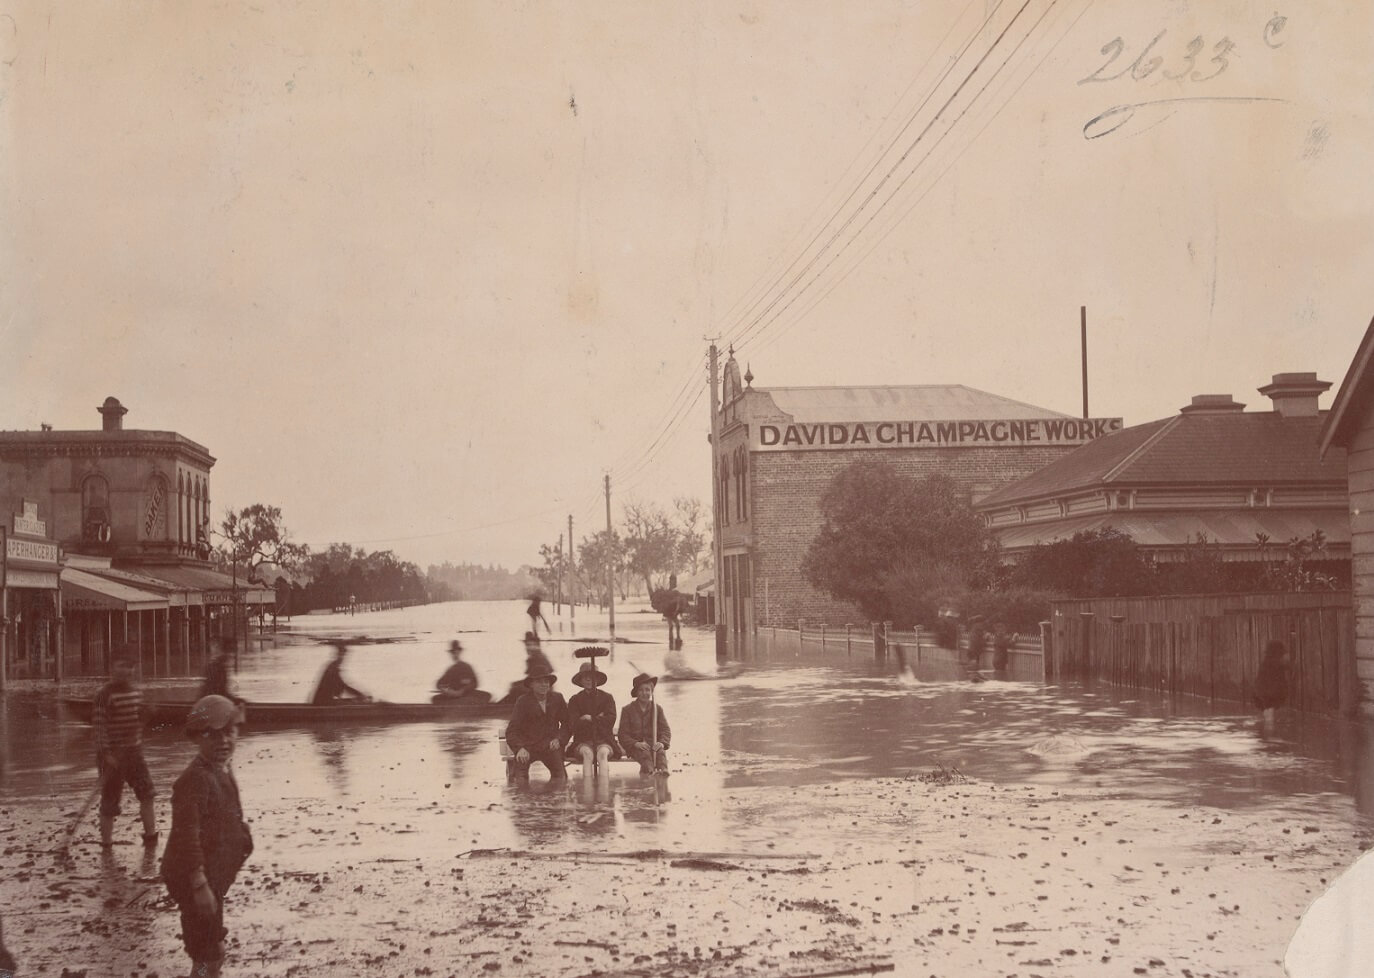 flooded street with houses on either side. A large building on the right side of the image advertises "Davida Champagne Works". 3 people  sit on a bench in the flood water, while another 4 row past. A young boy stares at the camera from the left side of the image.